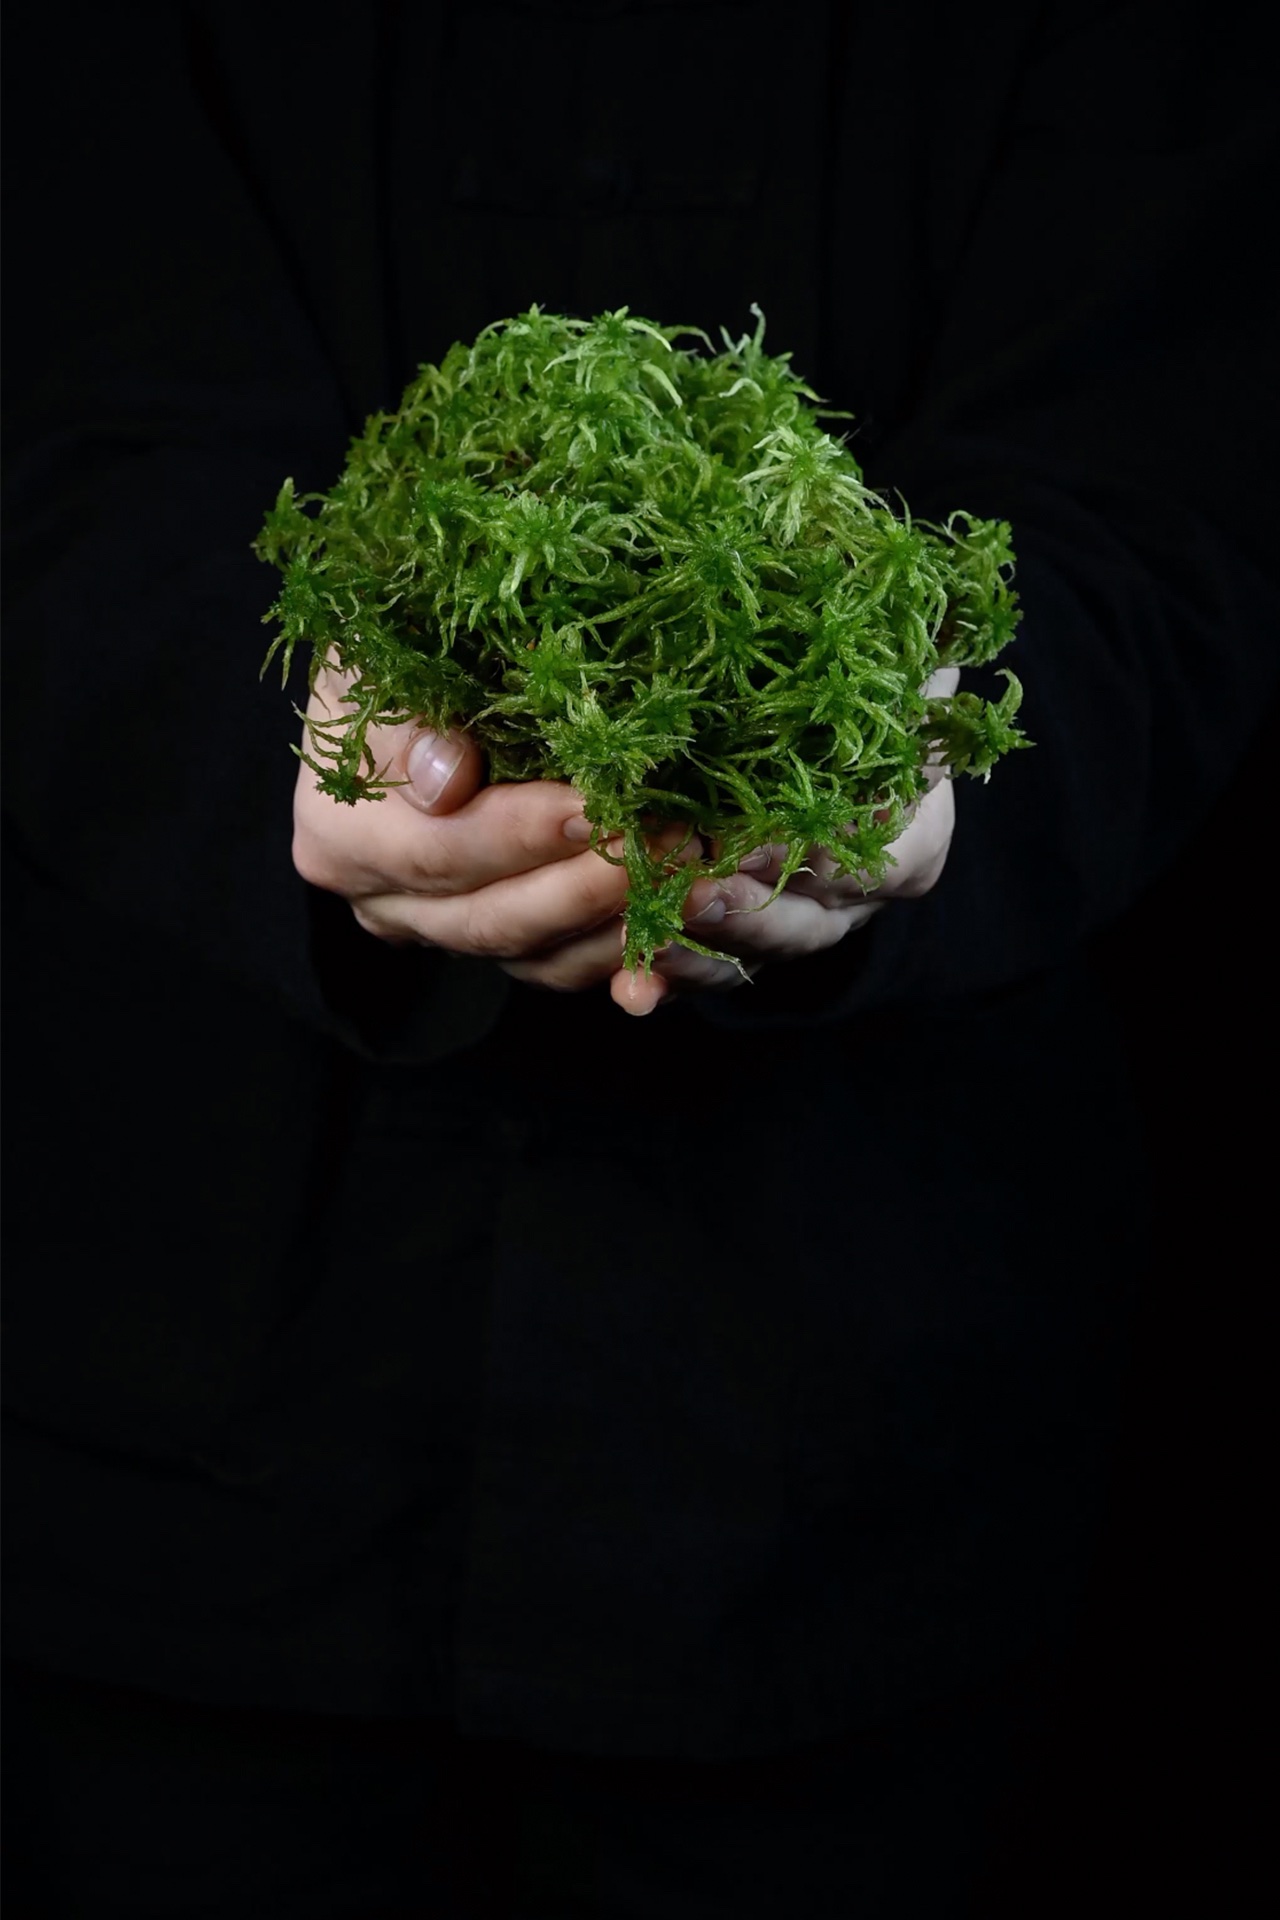 A white pair of hands holding wet moss, water dripping. Video shot against a black background.